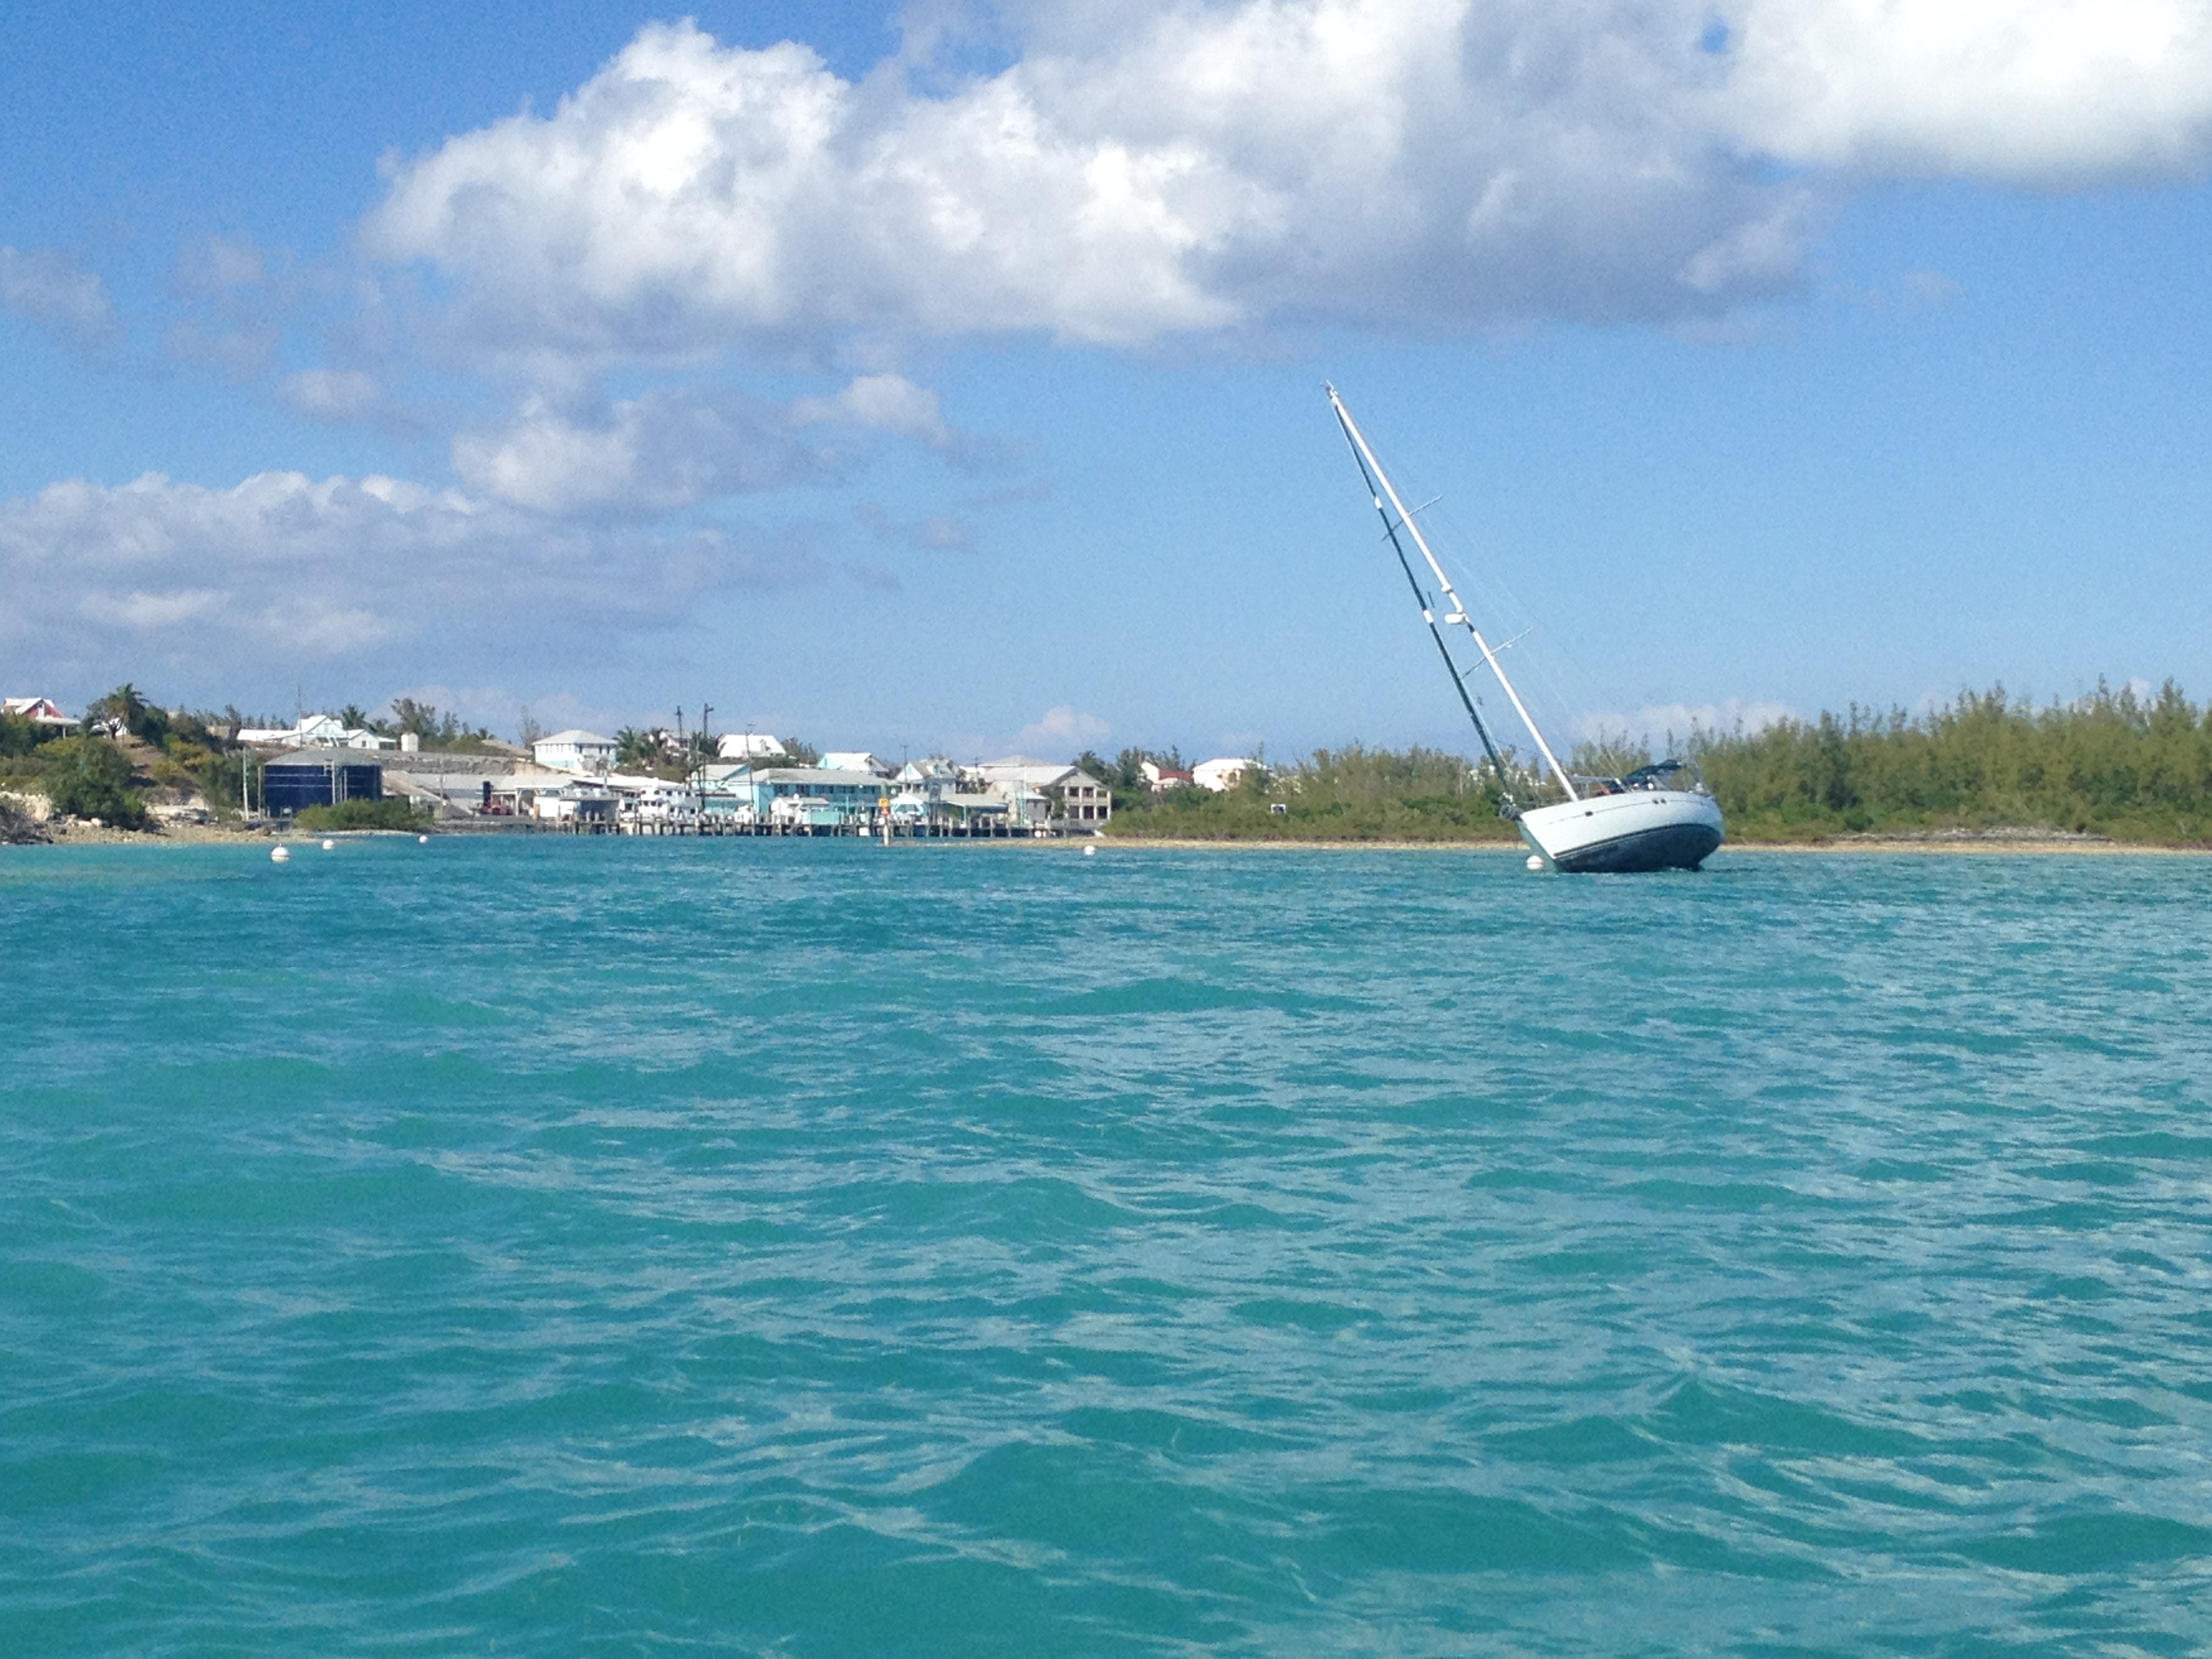 Sailing vessel Fancy Free aground at the entrance to Spanish Wells